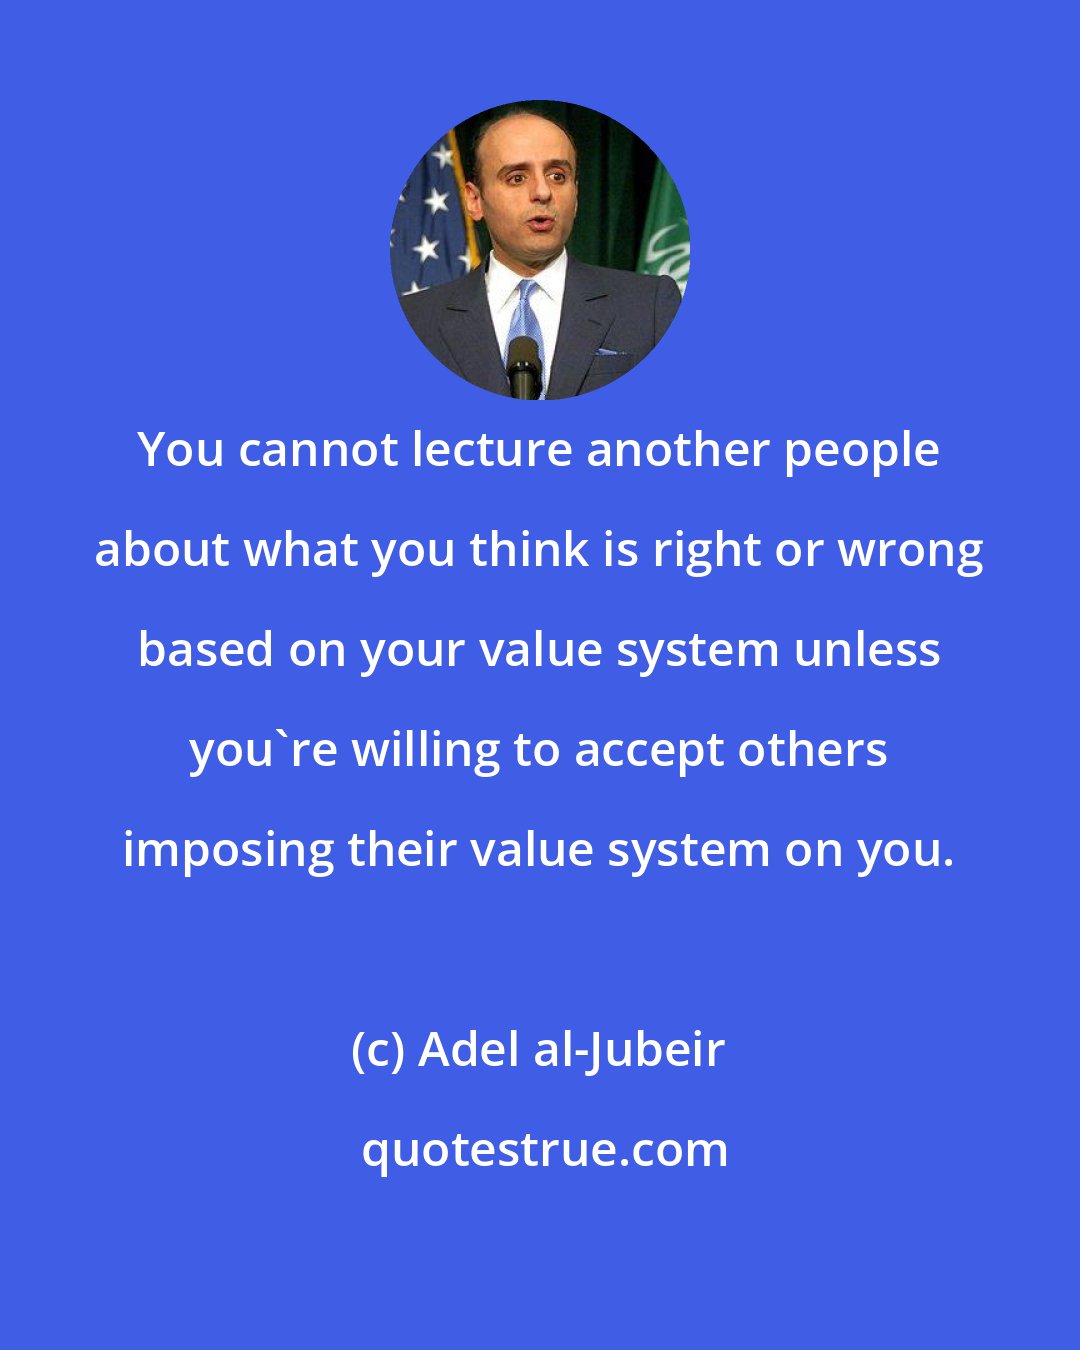 Adel al-Jubeir: You cannot lecture another people about what you think is right or wrong based on your value system unless you're willing to accept others imposing their value system on you.